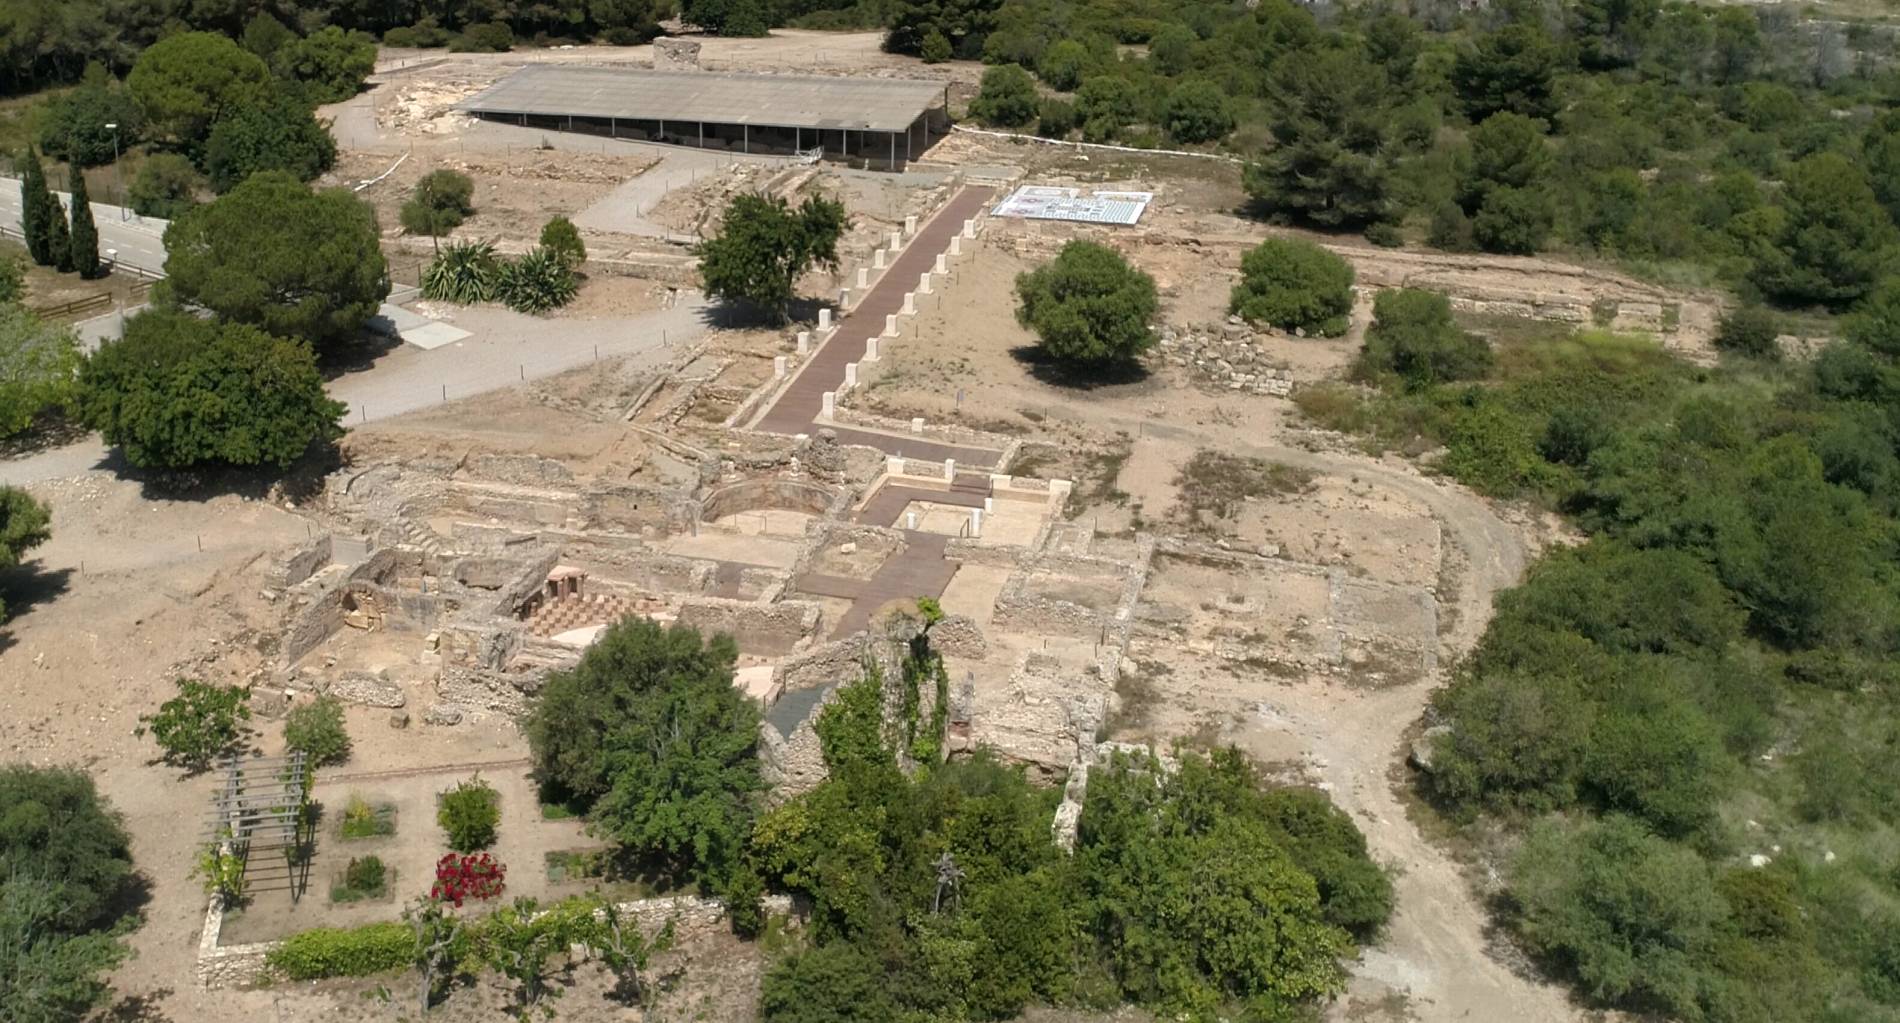 General view of the site.